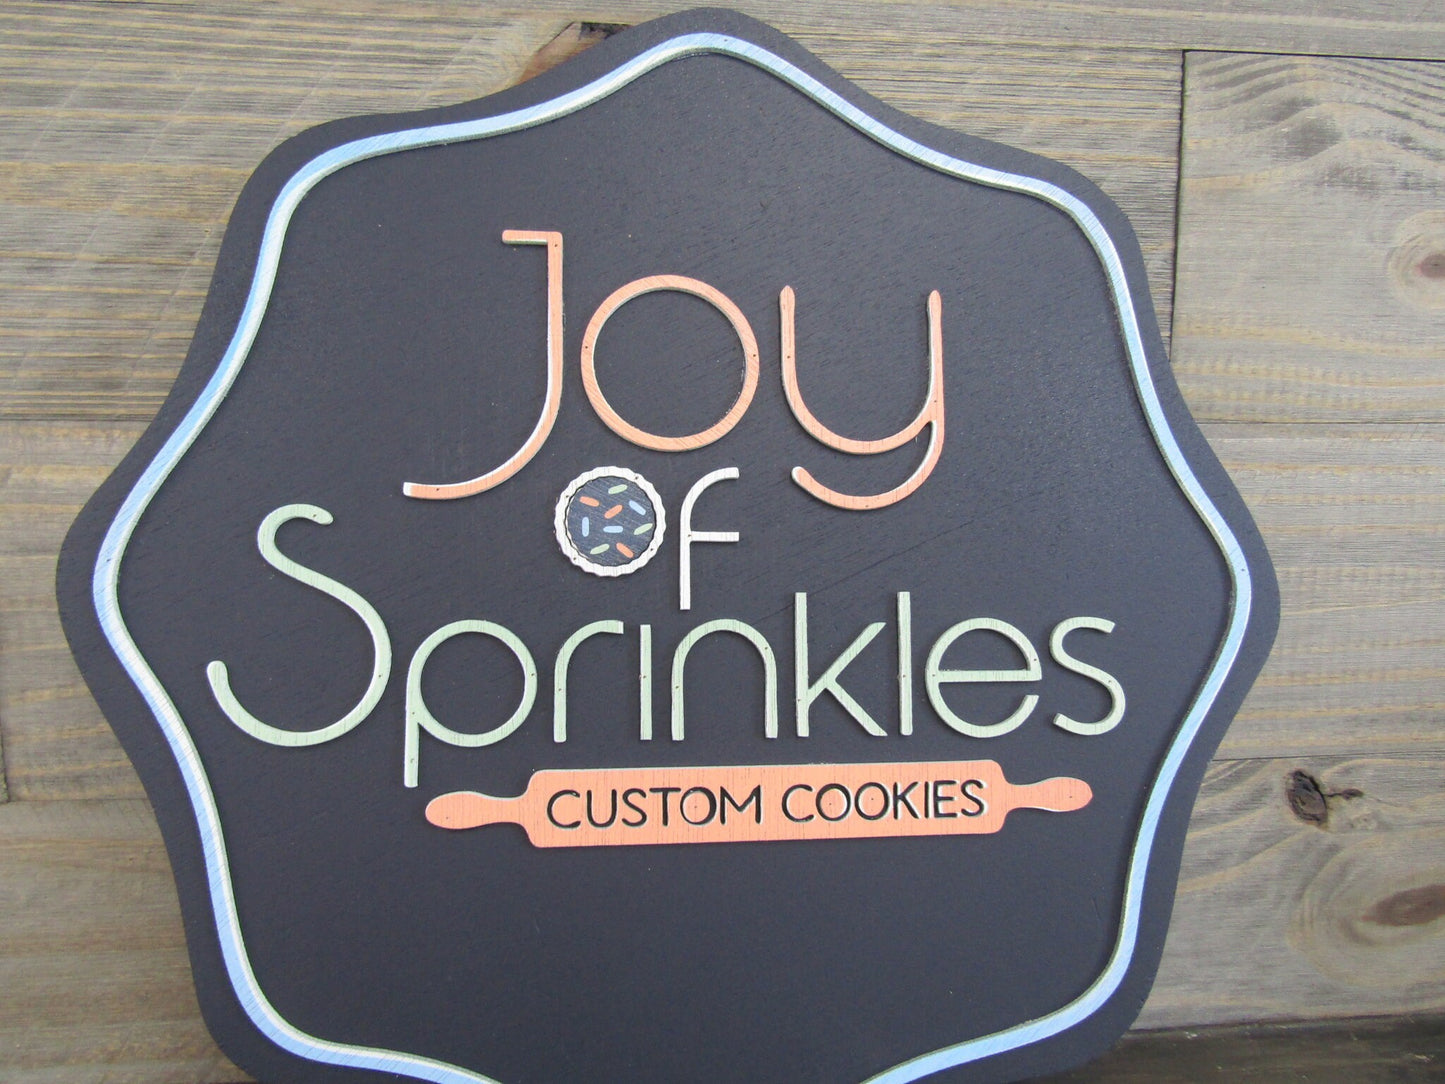 Large Bottle Cap Round Scalloped Joy Of Sprinkles Cookie Co Sign Business Bake Commercial Signage 3D Raised Text Your Logo XL Made to Order